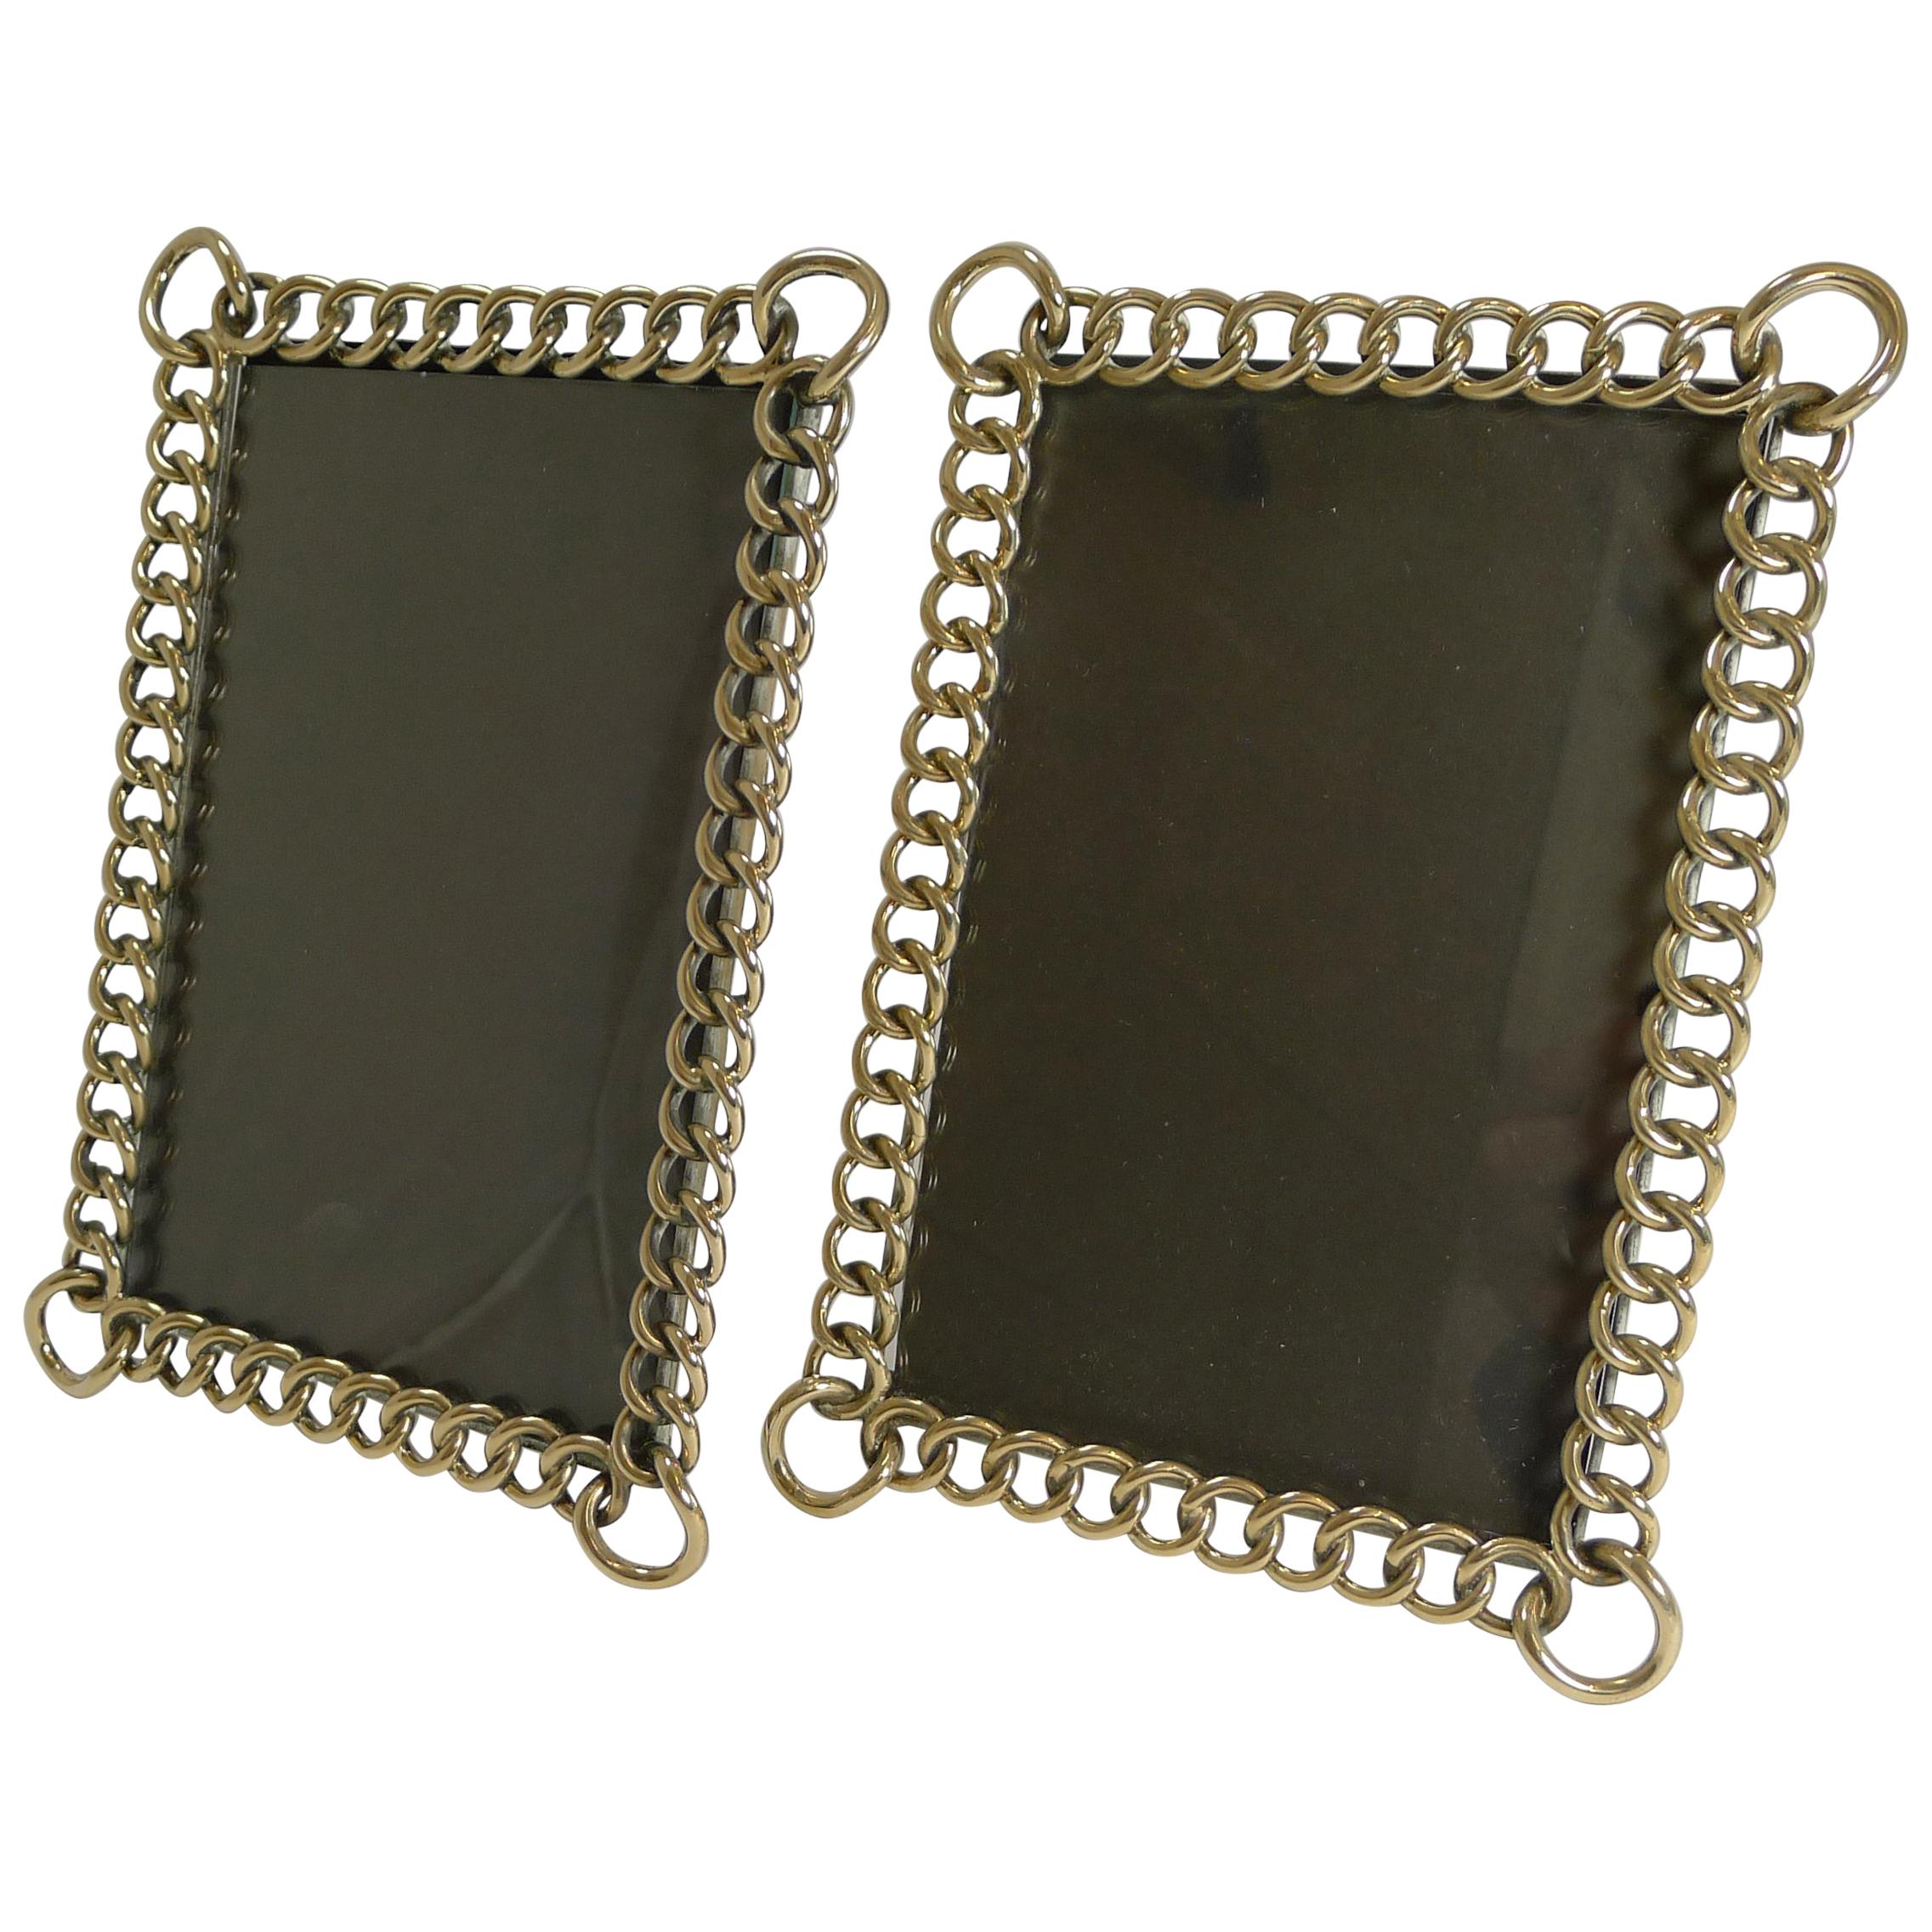 Pair of Antique English Polished Brass Ring Photograph Frames, circa 1890